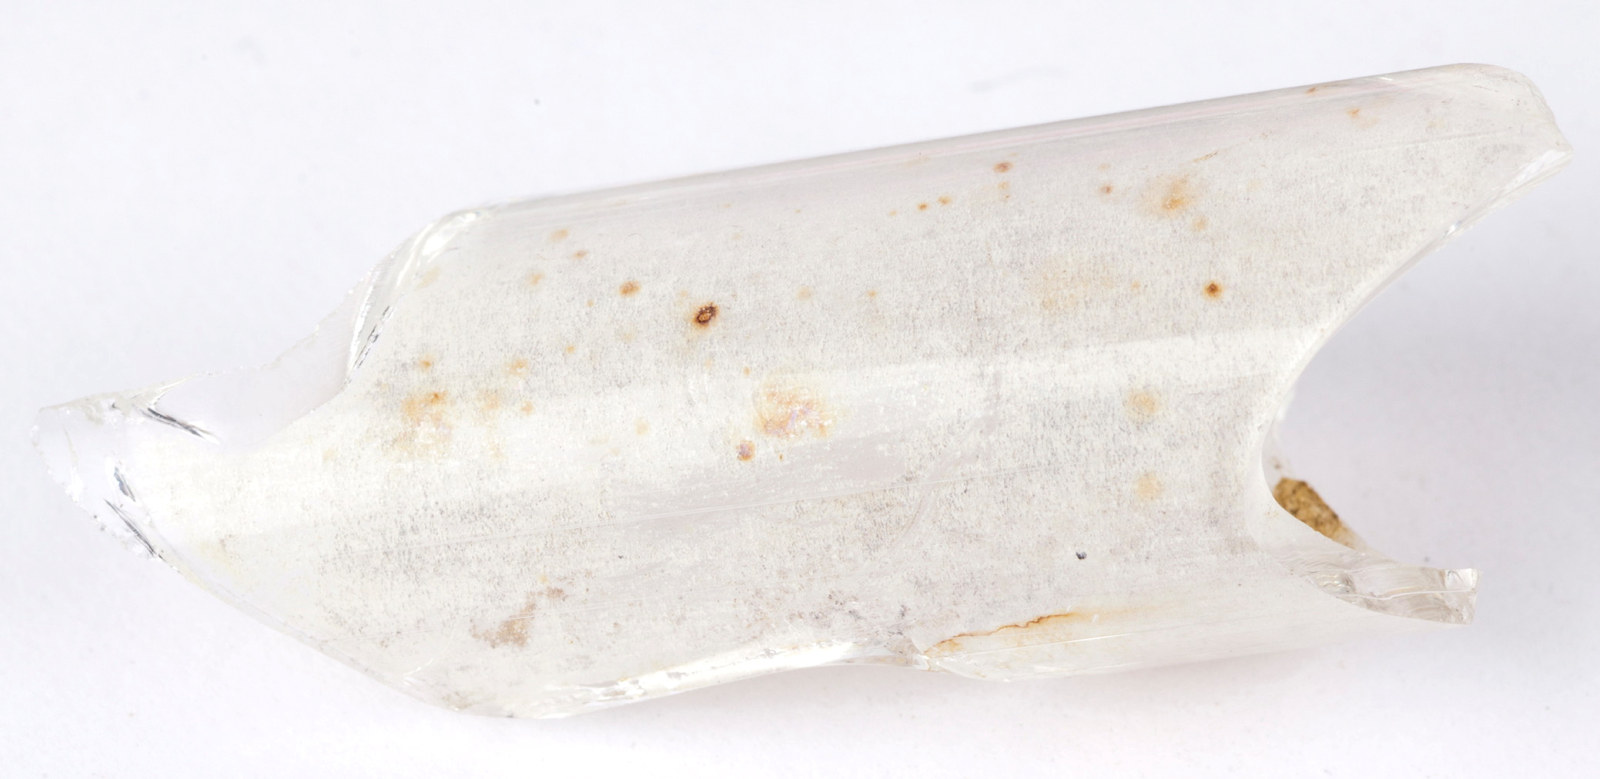 Piece of glass tube with discoloured surface.